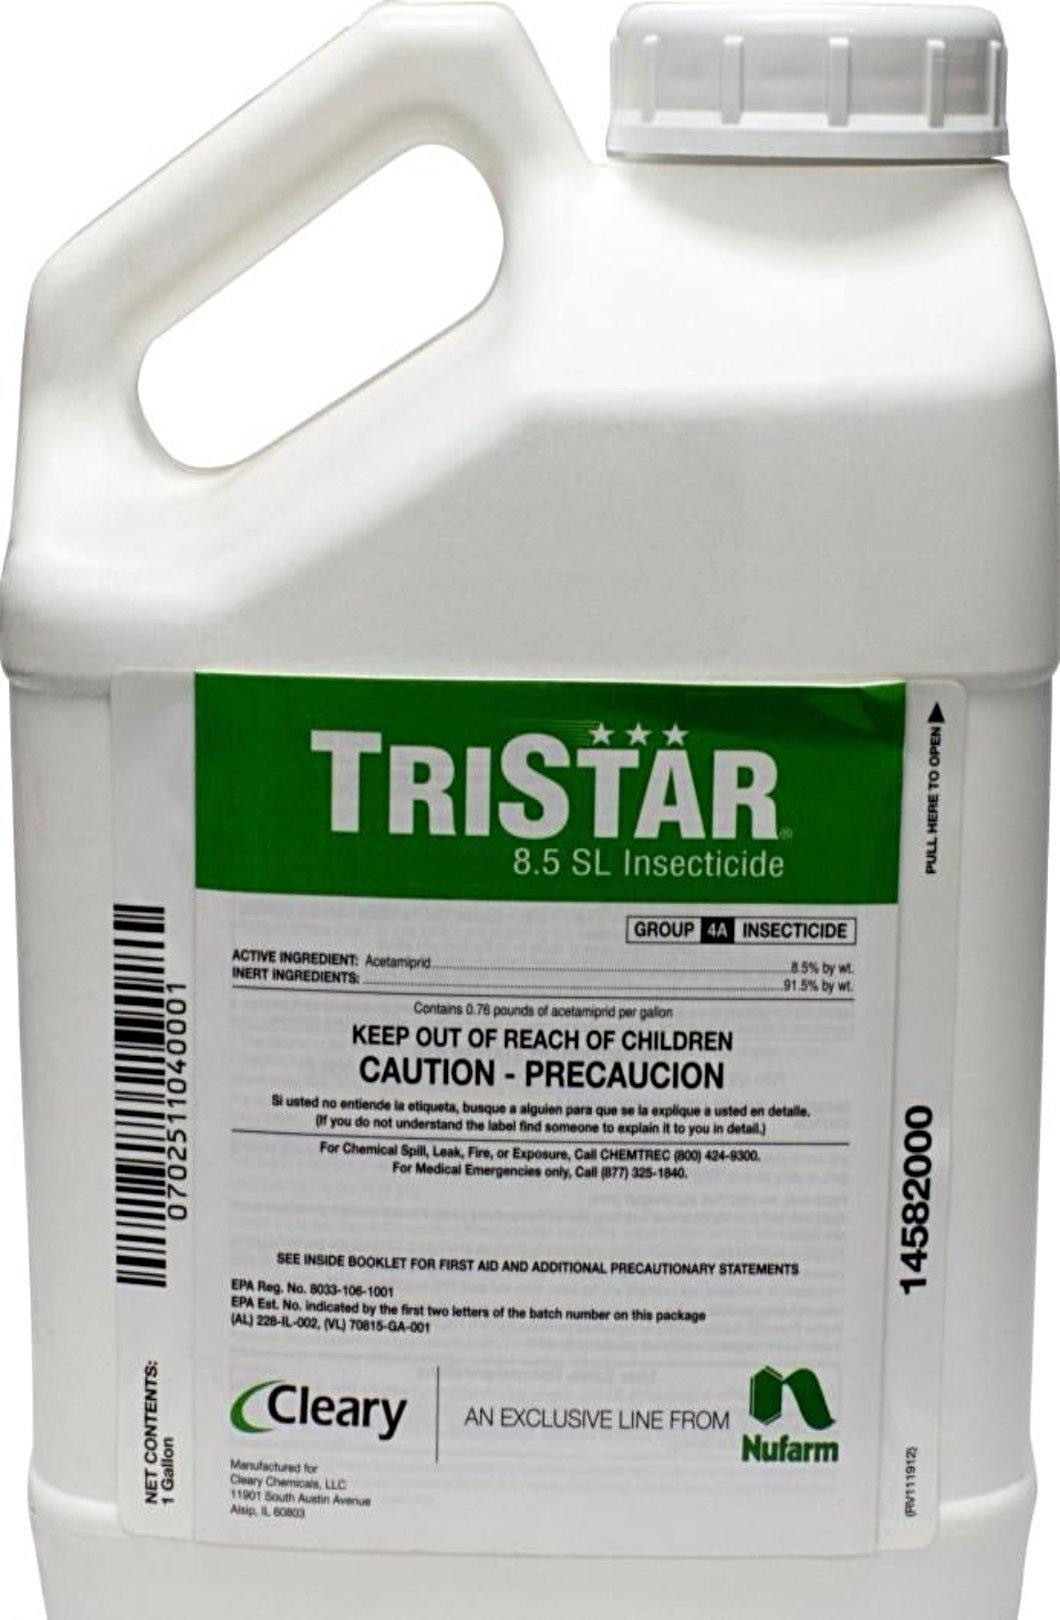 Insecticide - TriStar 8.5 SL Insecticide